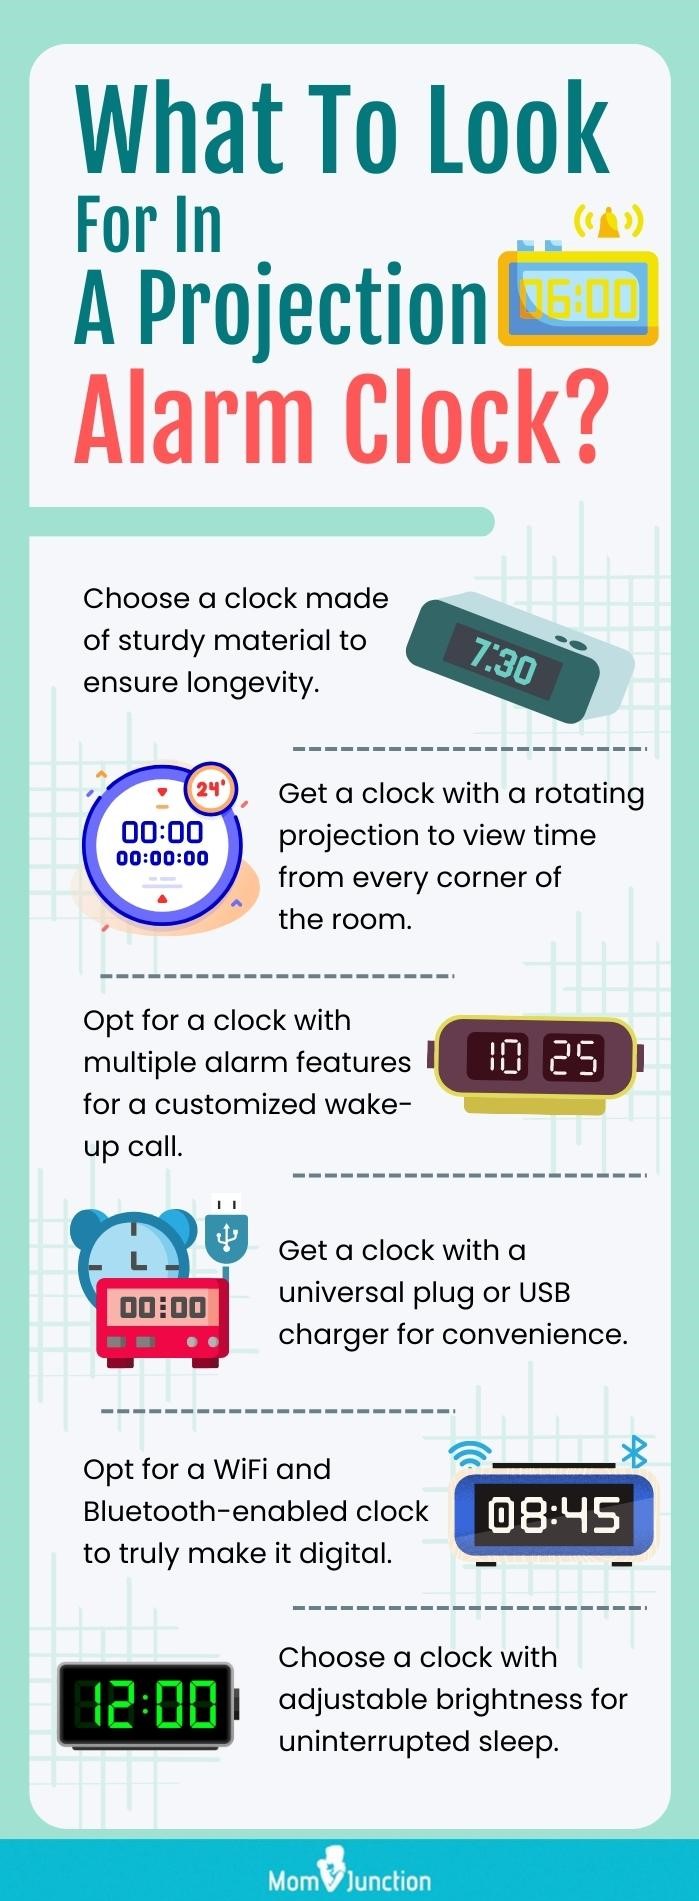 What To Look For In A Projection Alarm Clock